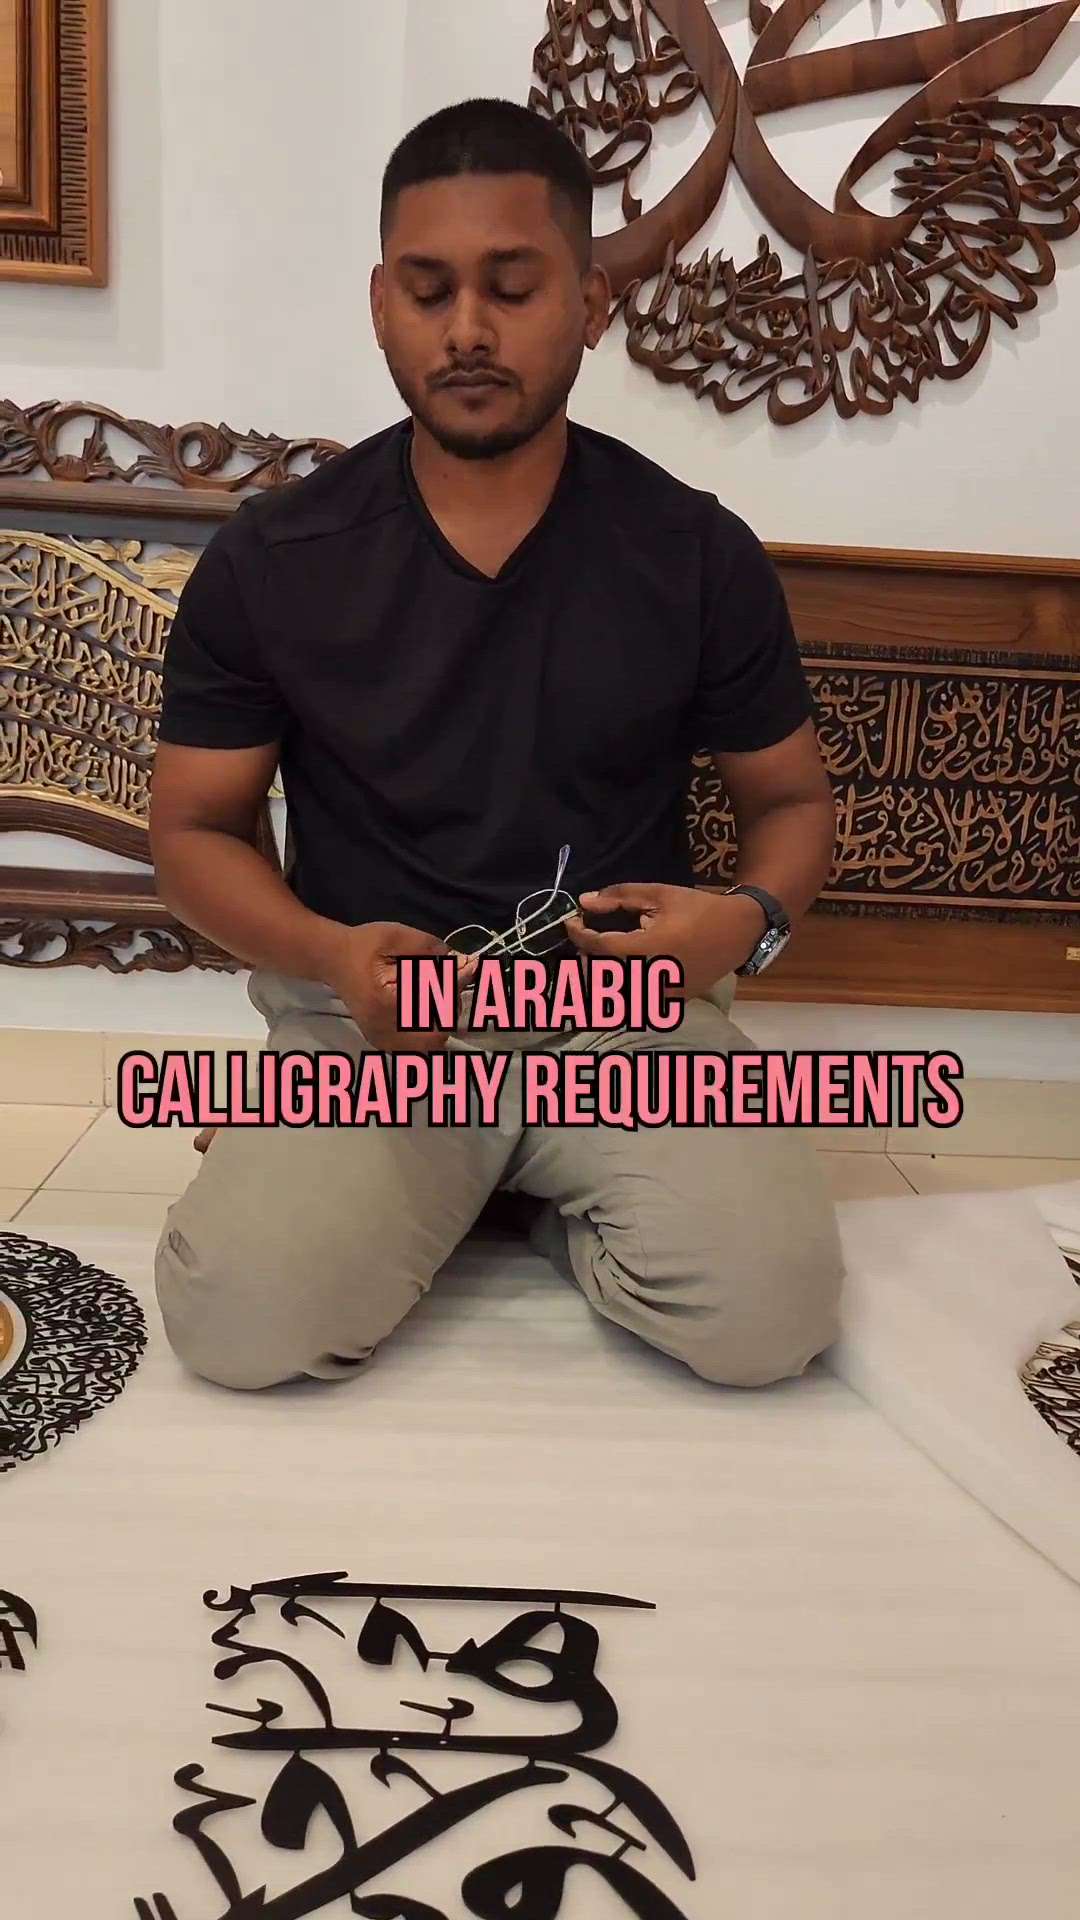 Dm for pricelist.
Whatsapp me on 9633023287

We have all India Delivery 
We are in kochi kakkanad
We have over 400 designs in wood and metal
Delivery free in kerala
We suggest designs and sometimes help you to install 
Yes its easy to hang

Save it for future 👇 Arabic calligraphy + large collection of designs + any size + colour + discounted pricing + delivery = Coversun. 

It is a must wall decor piece to every Muslim homes. It’s elegant, beautifully and it reminds us of Allah and his quran

Metal arts are so high in demand but the process of making it makes it less in supply. But now things changed. An young entrepreneur named rashad is doing whatever it takes to bring maximum collection on metal and wood wall arts and calligraphy. 

We are also joined his journey to support calligraphy lovers and artists along with reducing the gap of supply and demand. 

#caligraphy #metalwallart #arabiccalligraphy #WallDecors